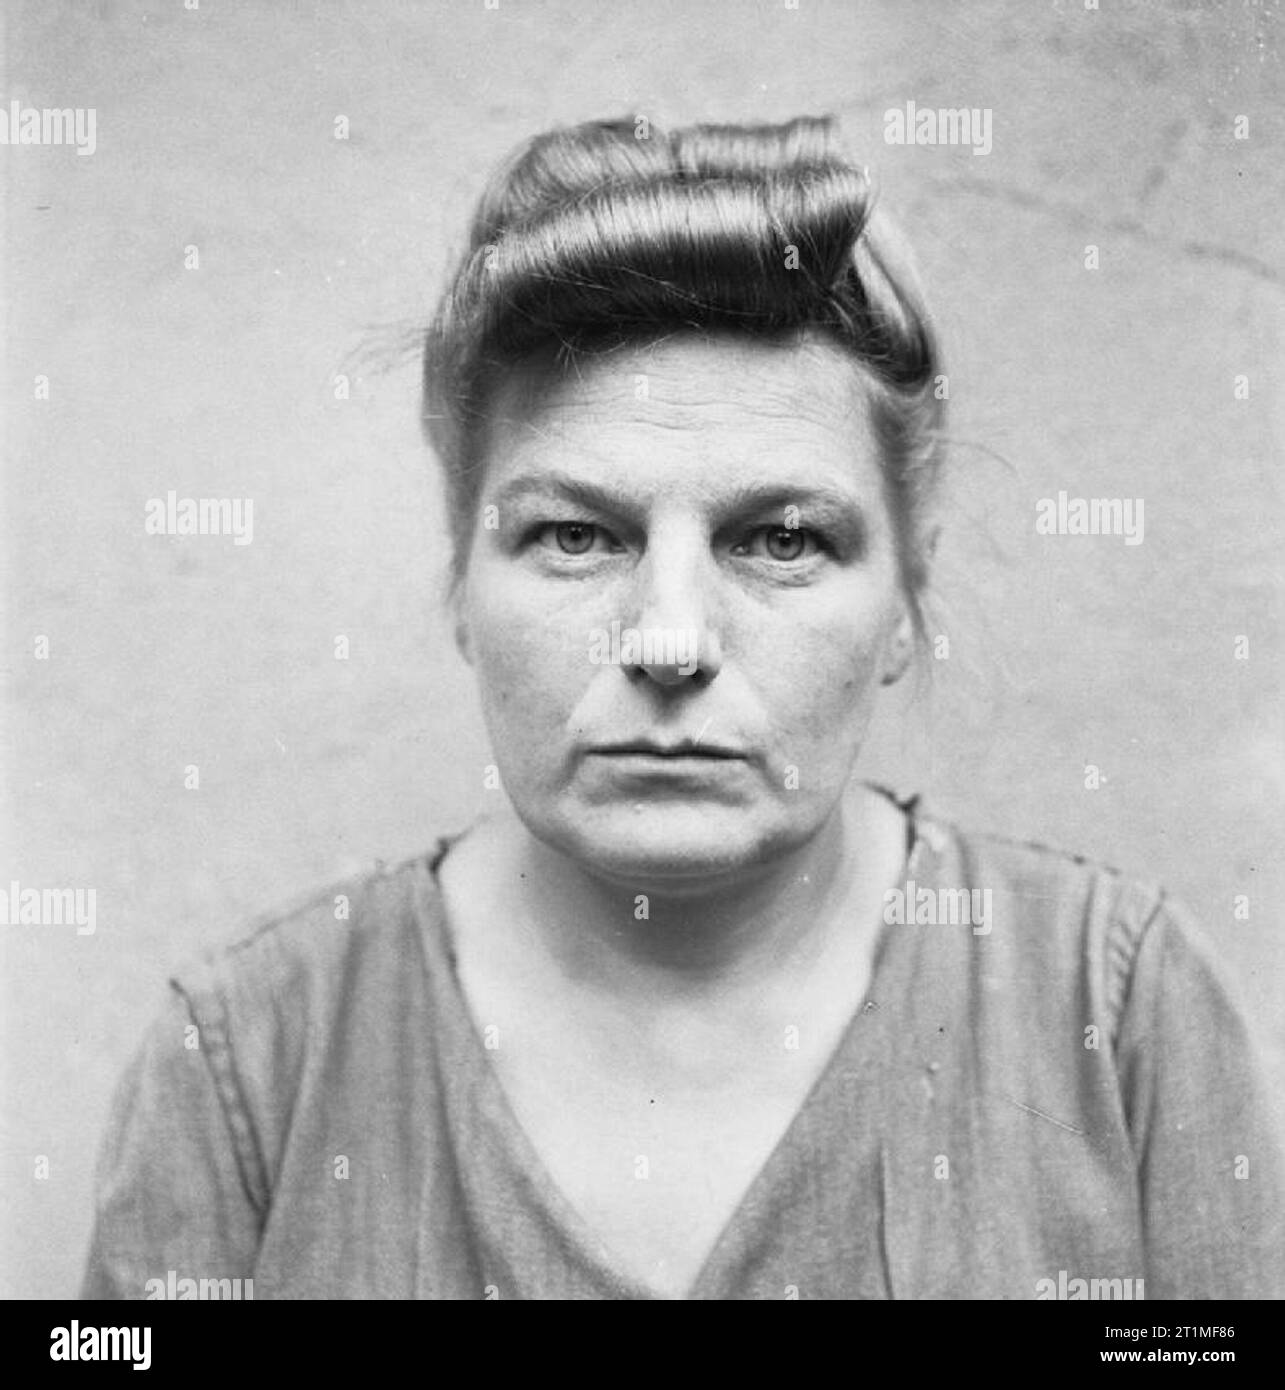 The Liberation of Bergen-belsen Concentration Camp 1945- Portraits of Belsen Guards at Celle Awaiting Trial, August 1945 Herta Ehlert: sentenced to 15 years imprisonment. Stock Photo